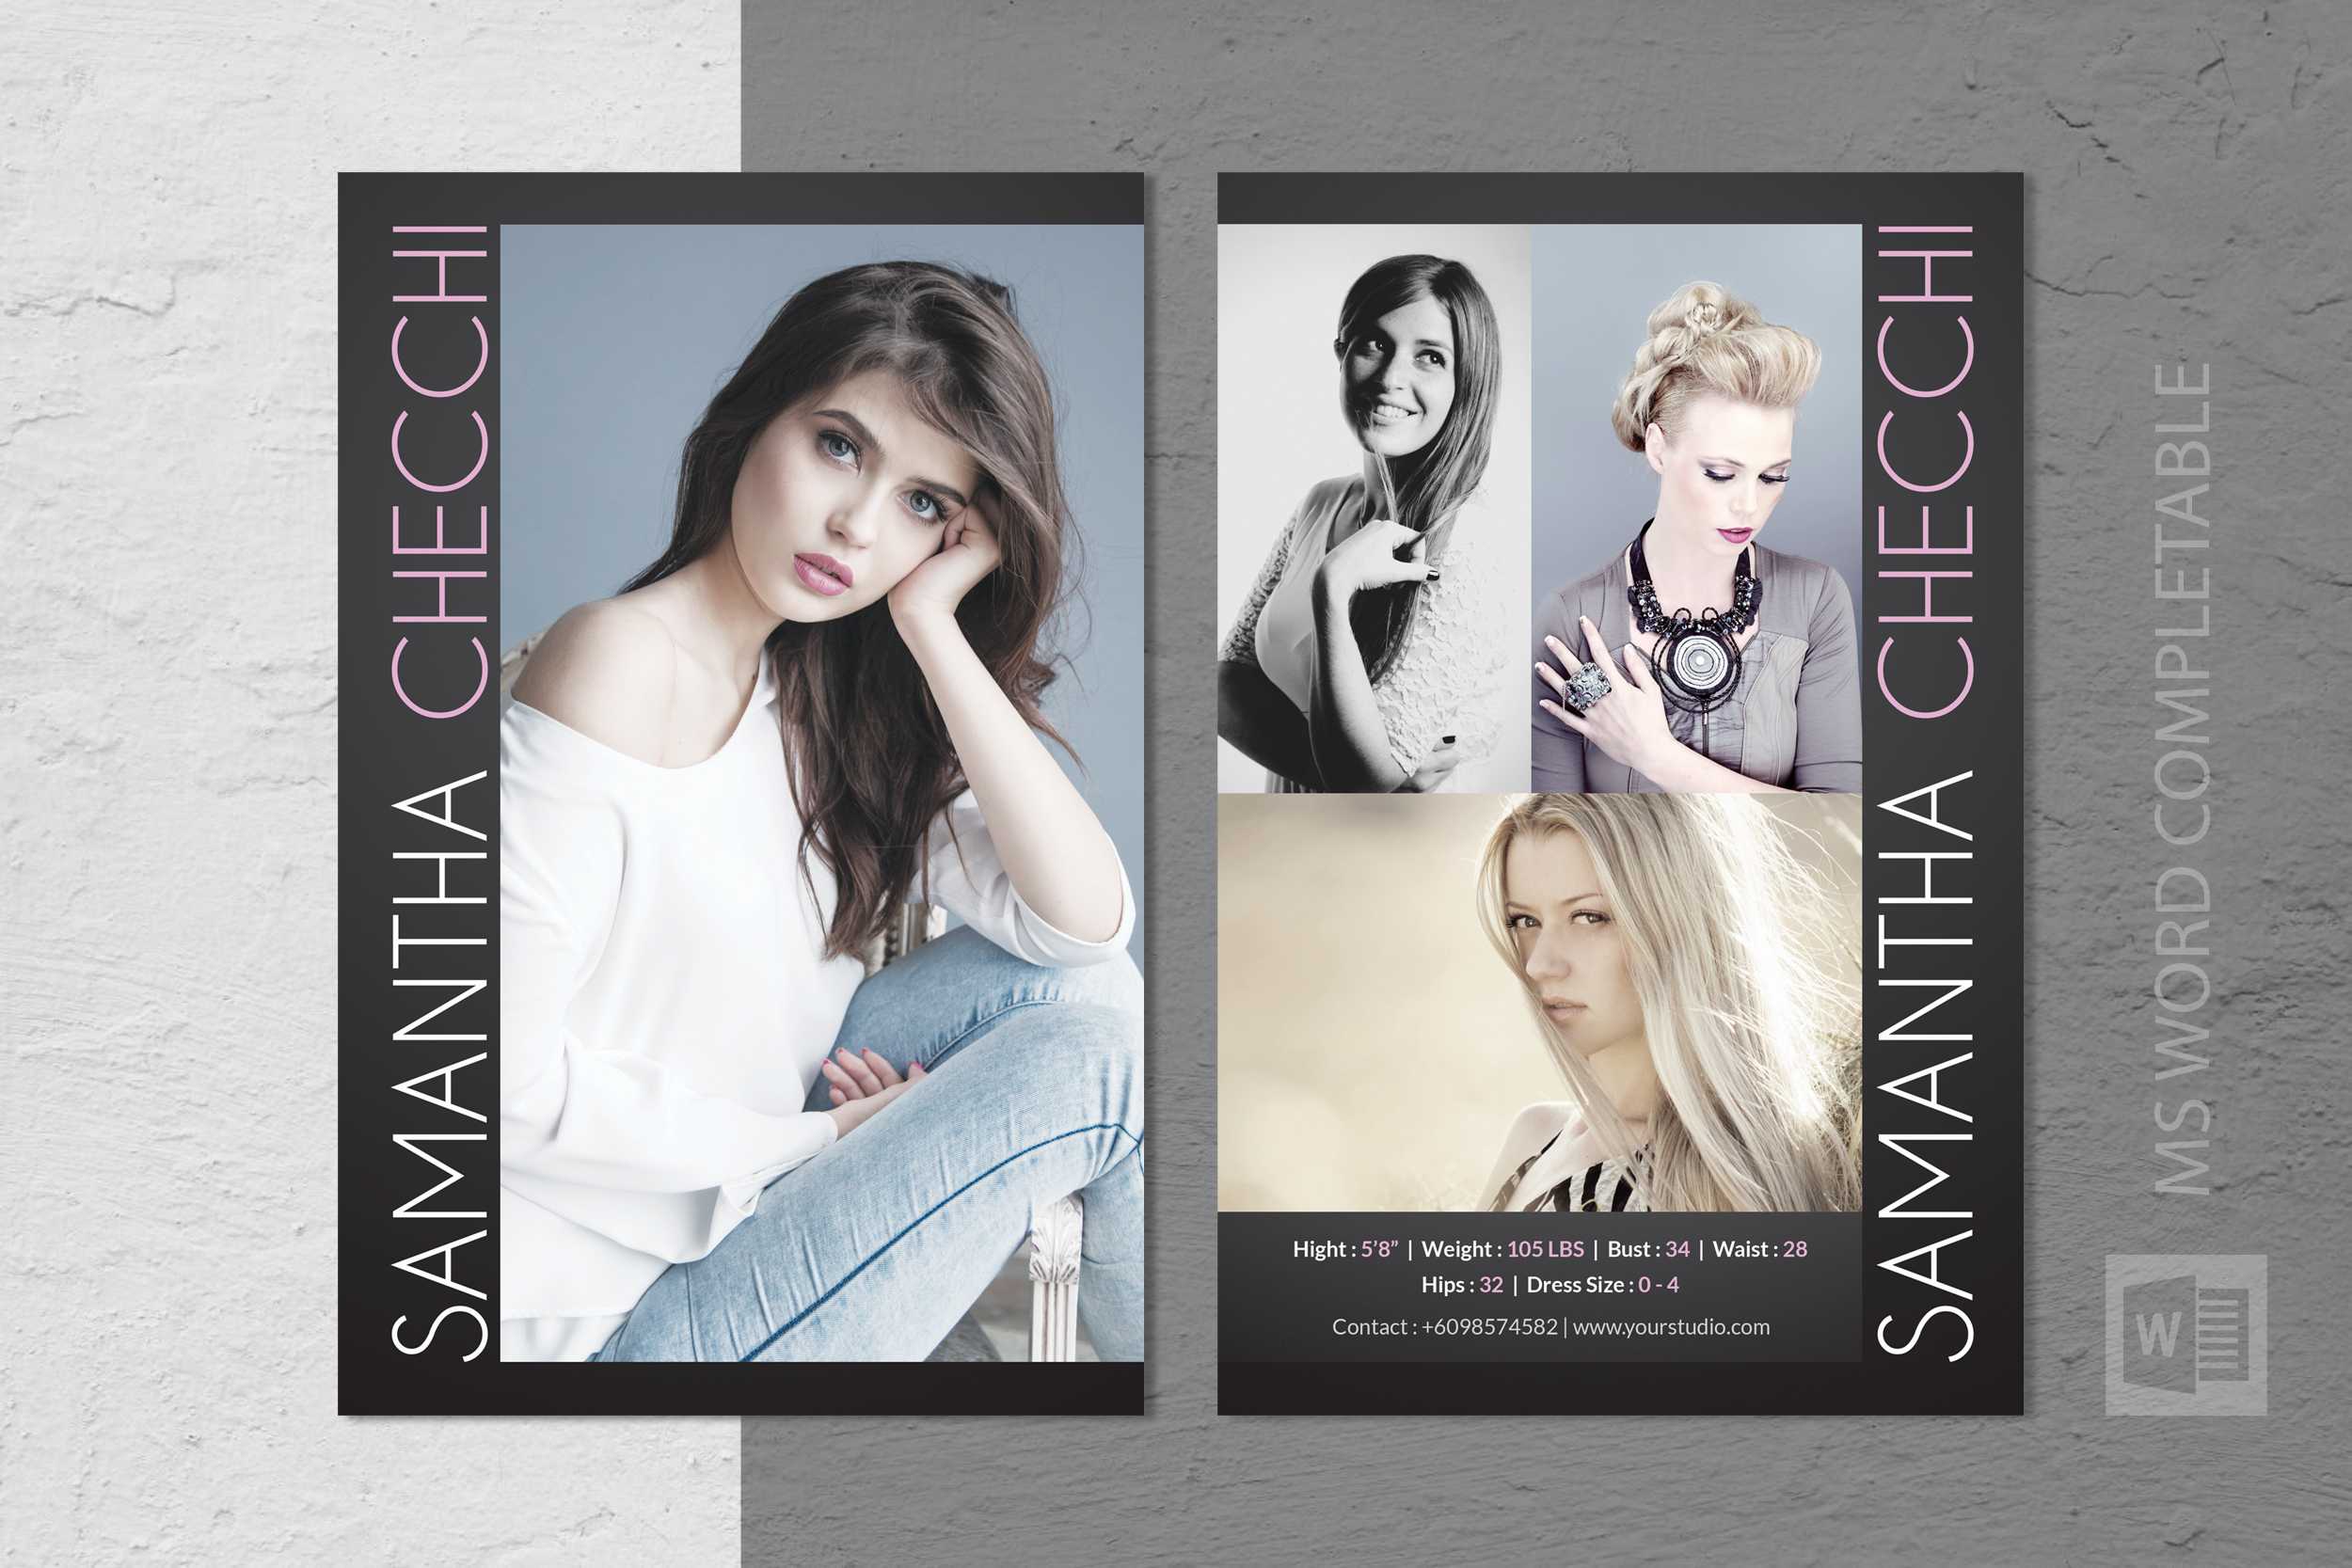 015 Model Comp Card Template Ideas Outstanding Psd Free Regarding Free Model Comp Card Template